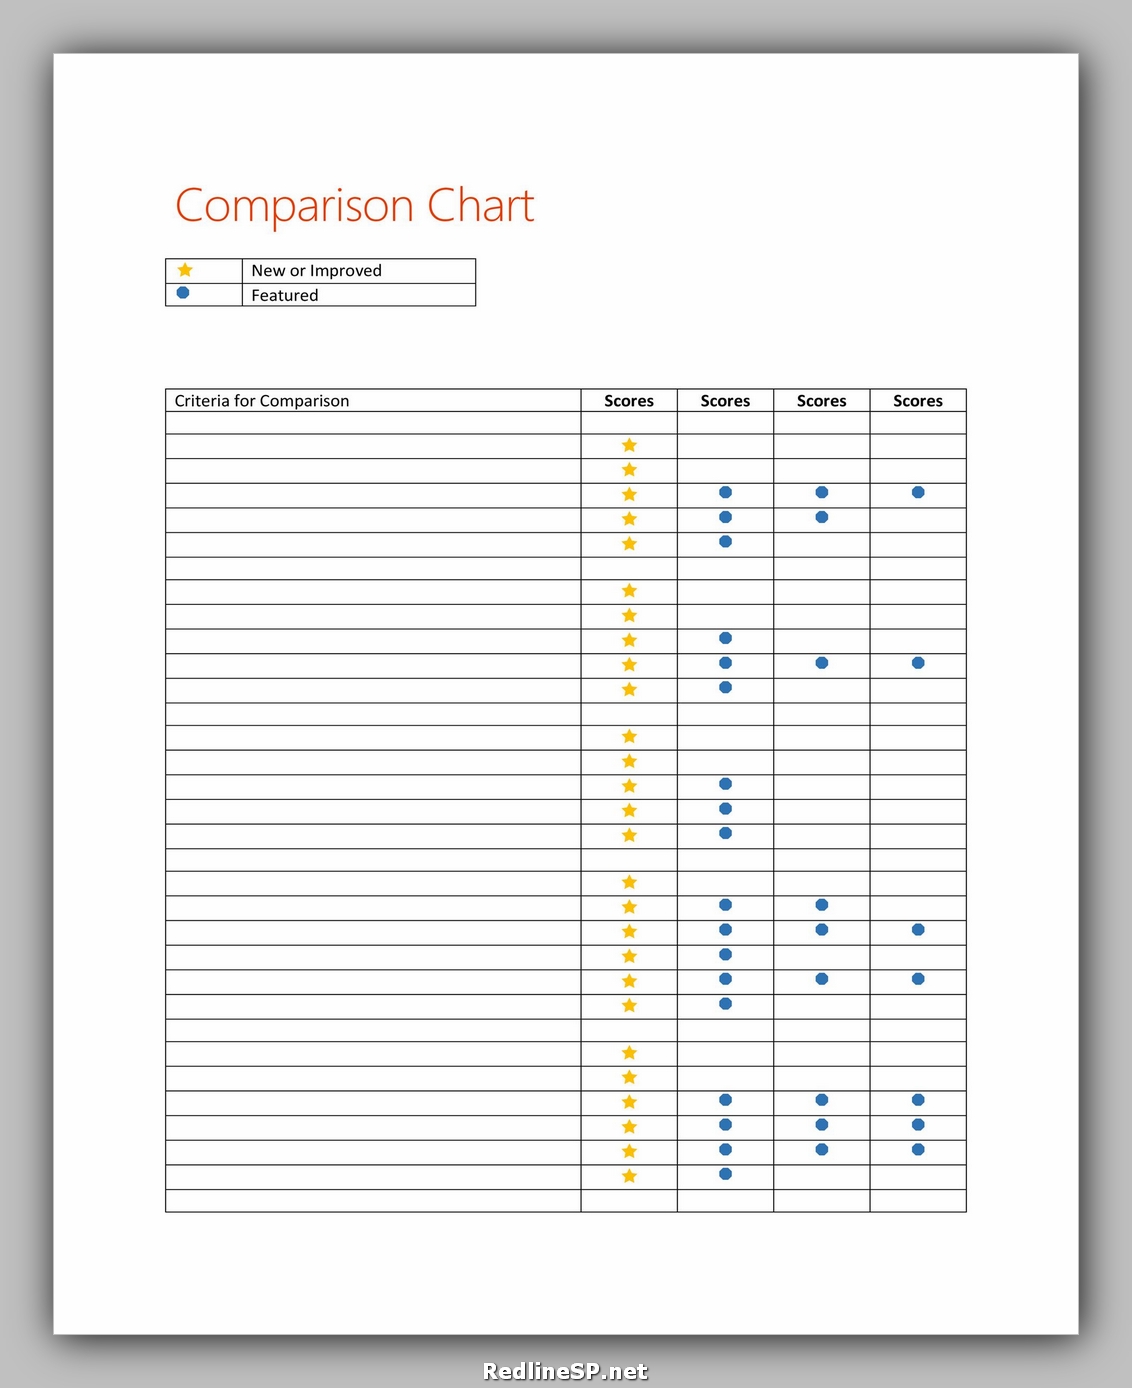 Free Comparison Chart Template Free Blank Comparison Chart Template ...